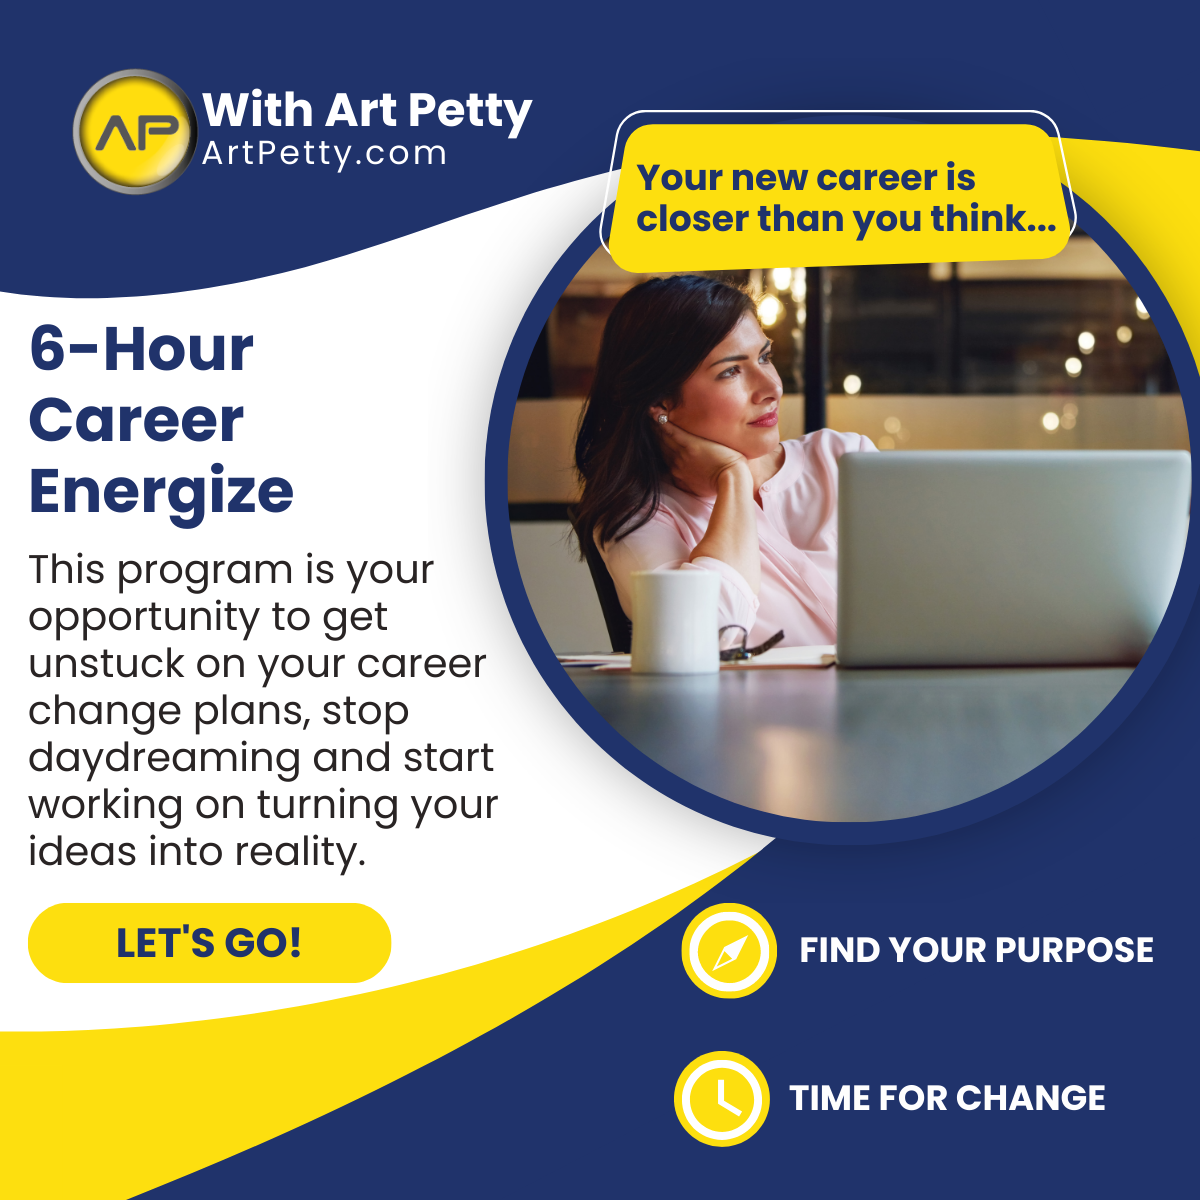 6-hour career Learn More Graphic